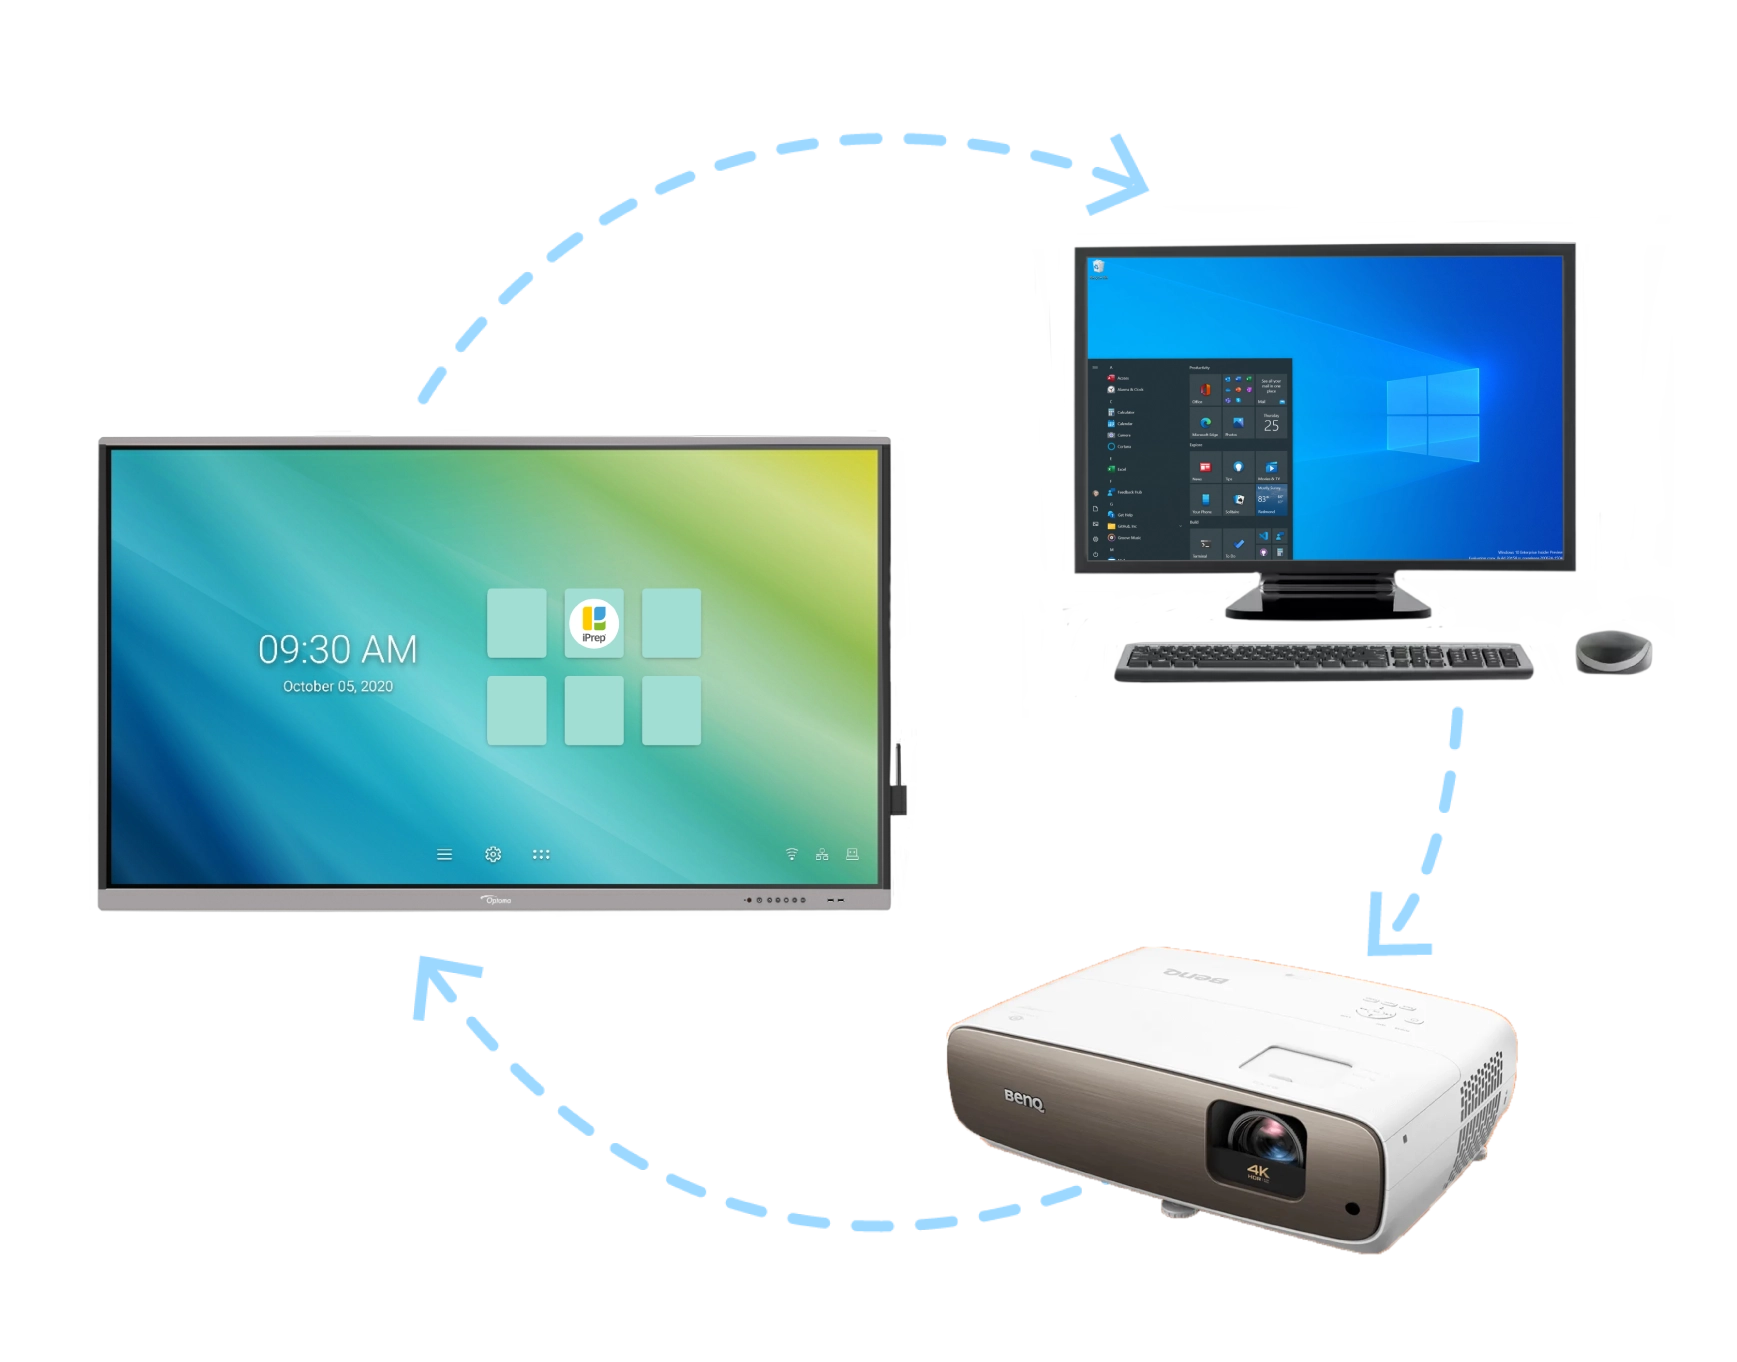 An image of iPrep Digital Class, a Smart Class Solution on SMART TVs, IFPs, and Projectors, loaded With Digital Learning content and LMS